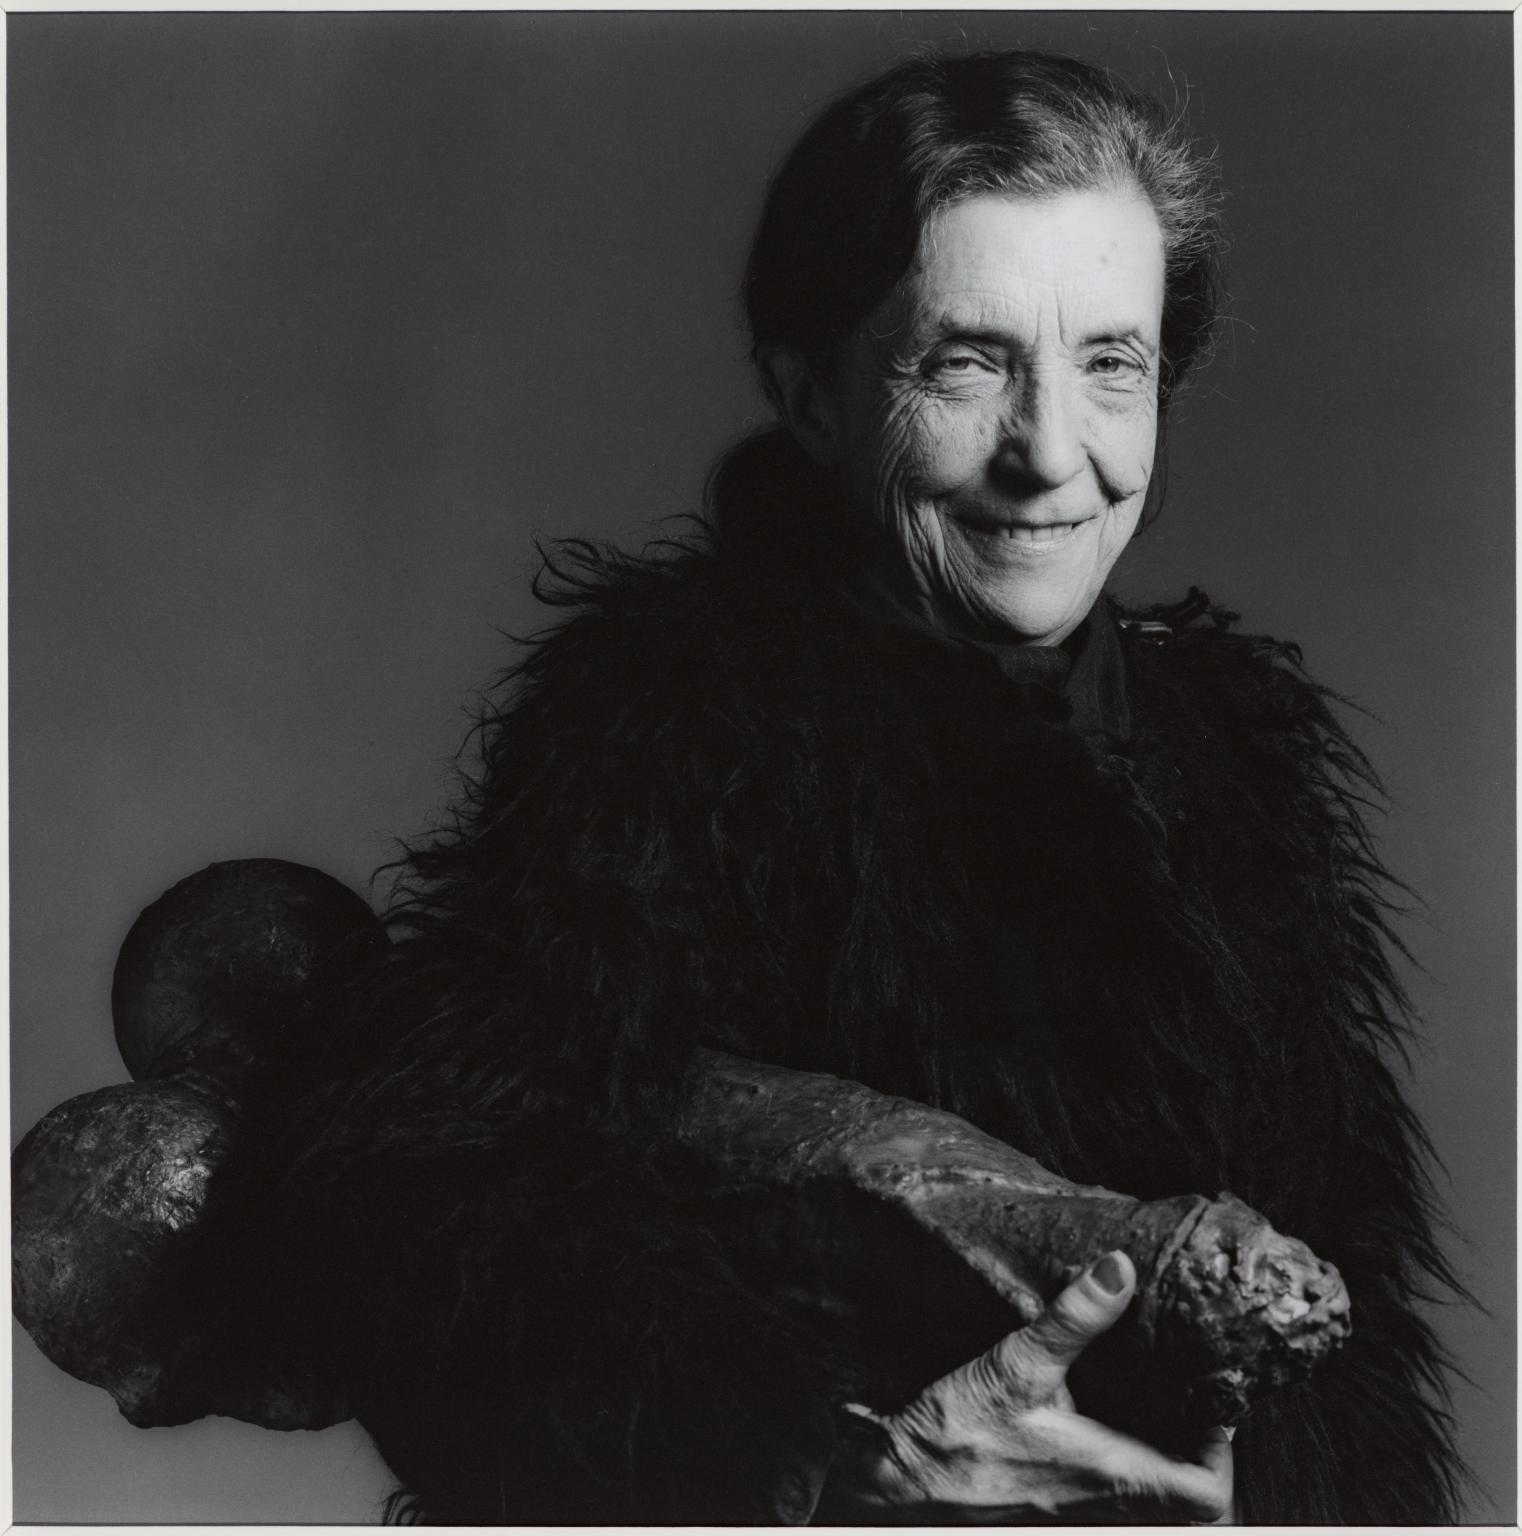 Louise Bourgeois Biography, Artworks & Exhibitions